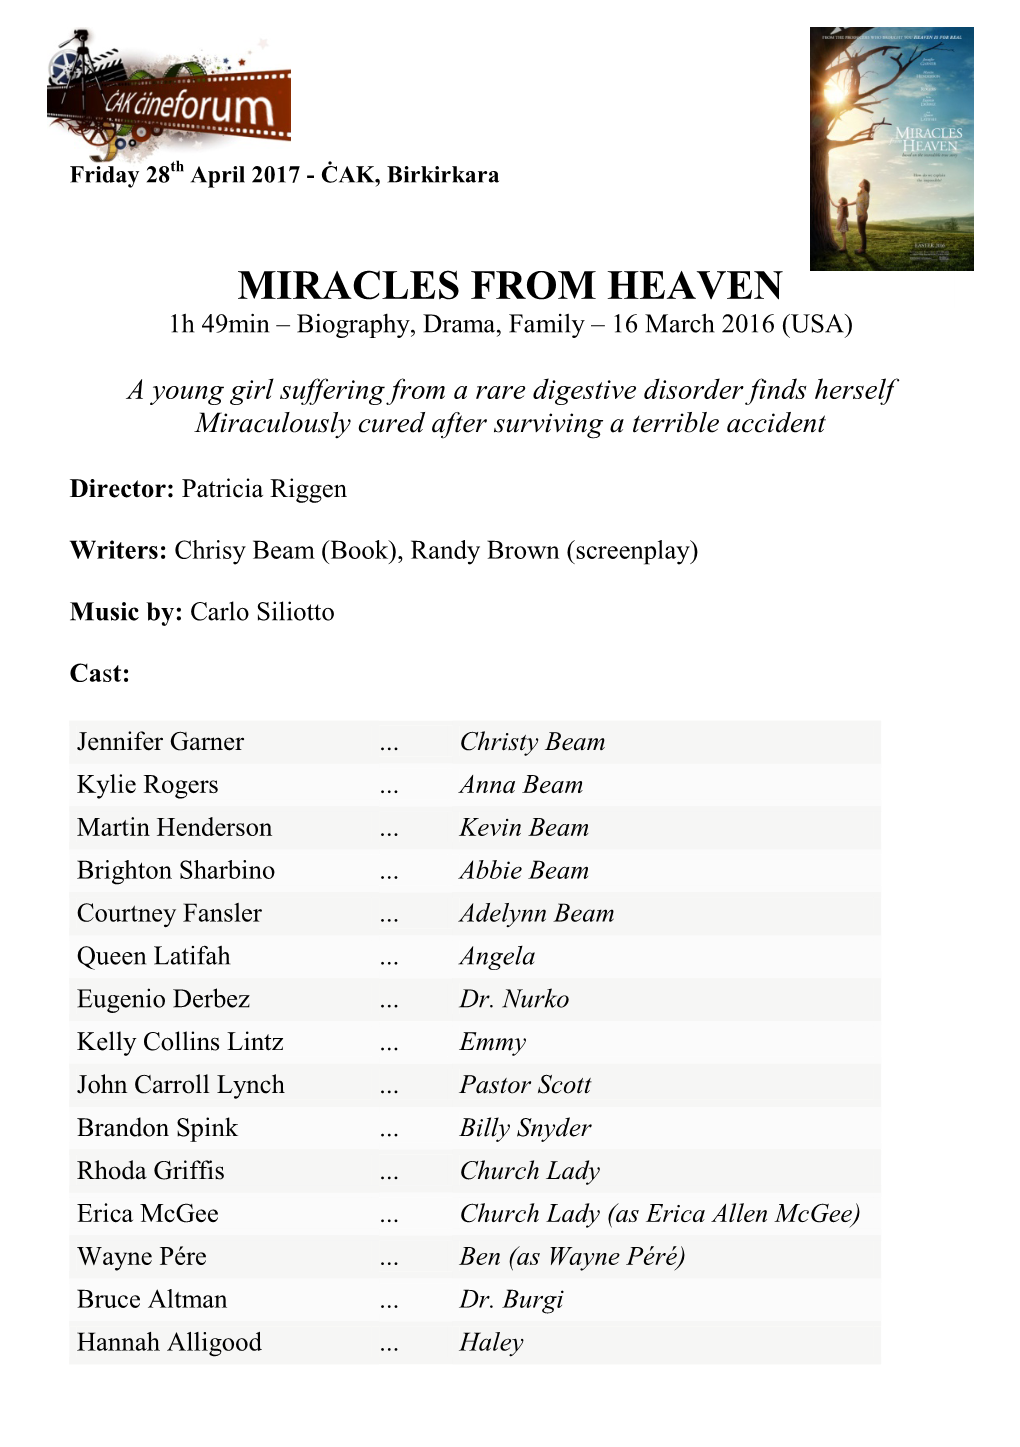 MIRACLES from HEAVEN 1H 49Min – Biography, Drama, Family – 16 March 2016 (USA)